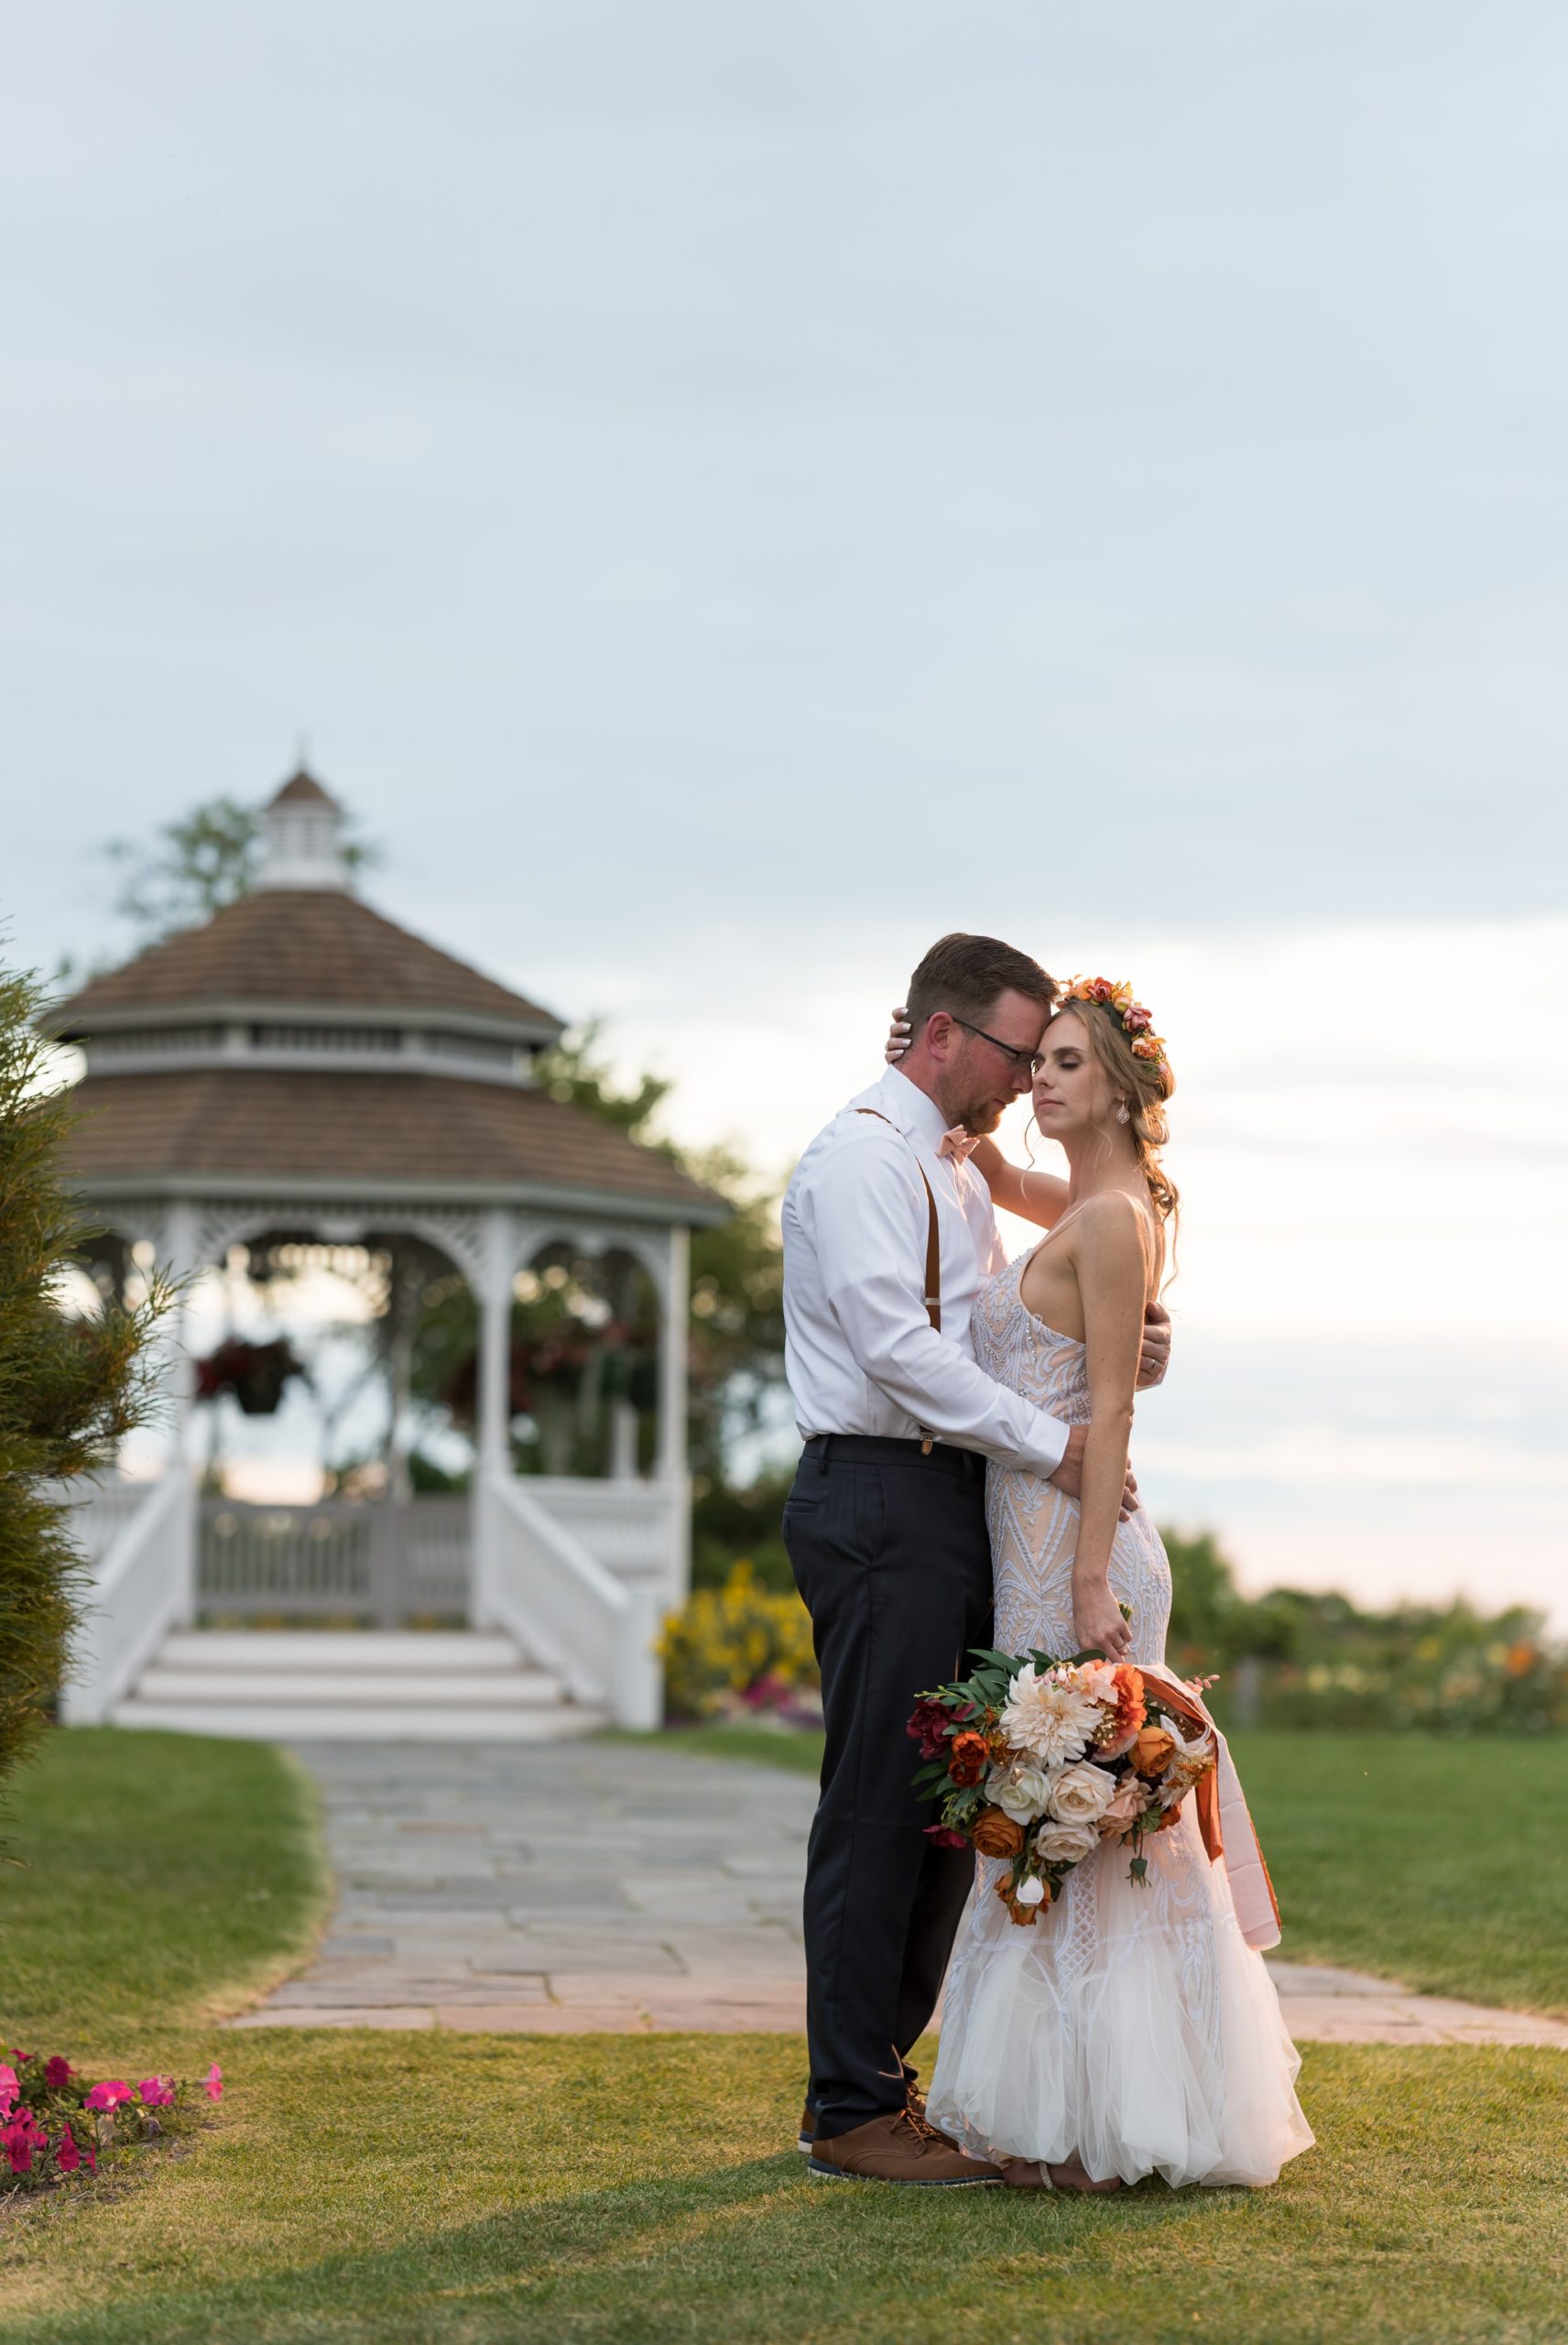 Standing with a gazebo in the background, a bride and groom close their eyes and hold each other at their Mission Pointe Resort wedding.  